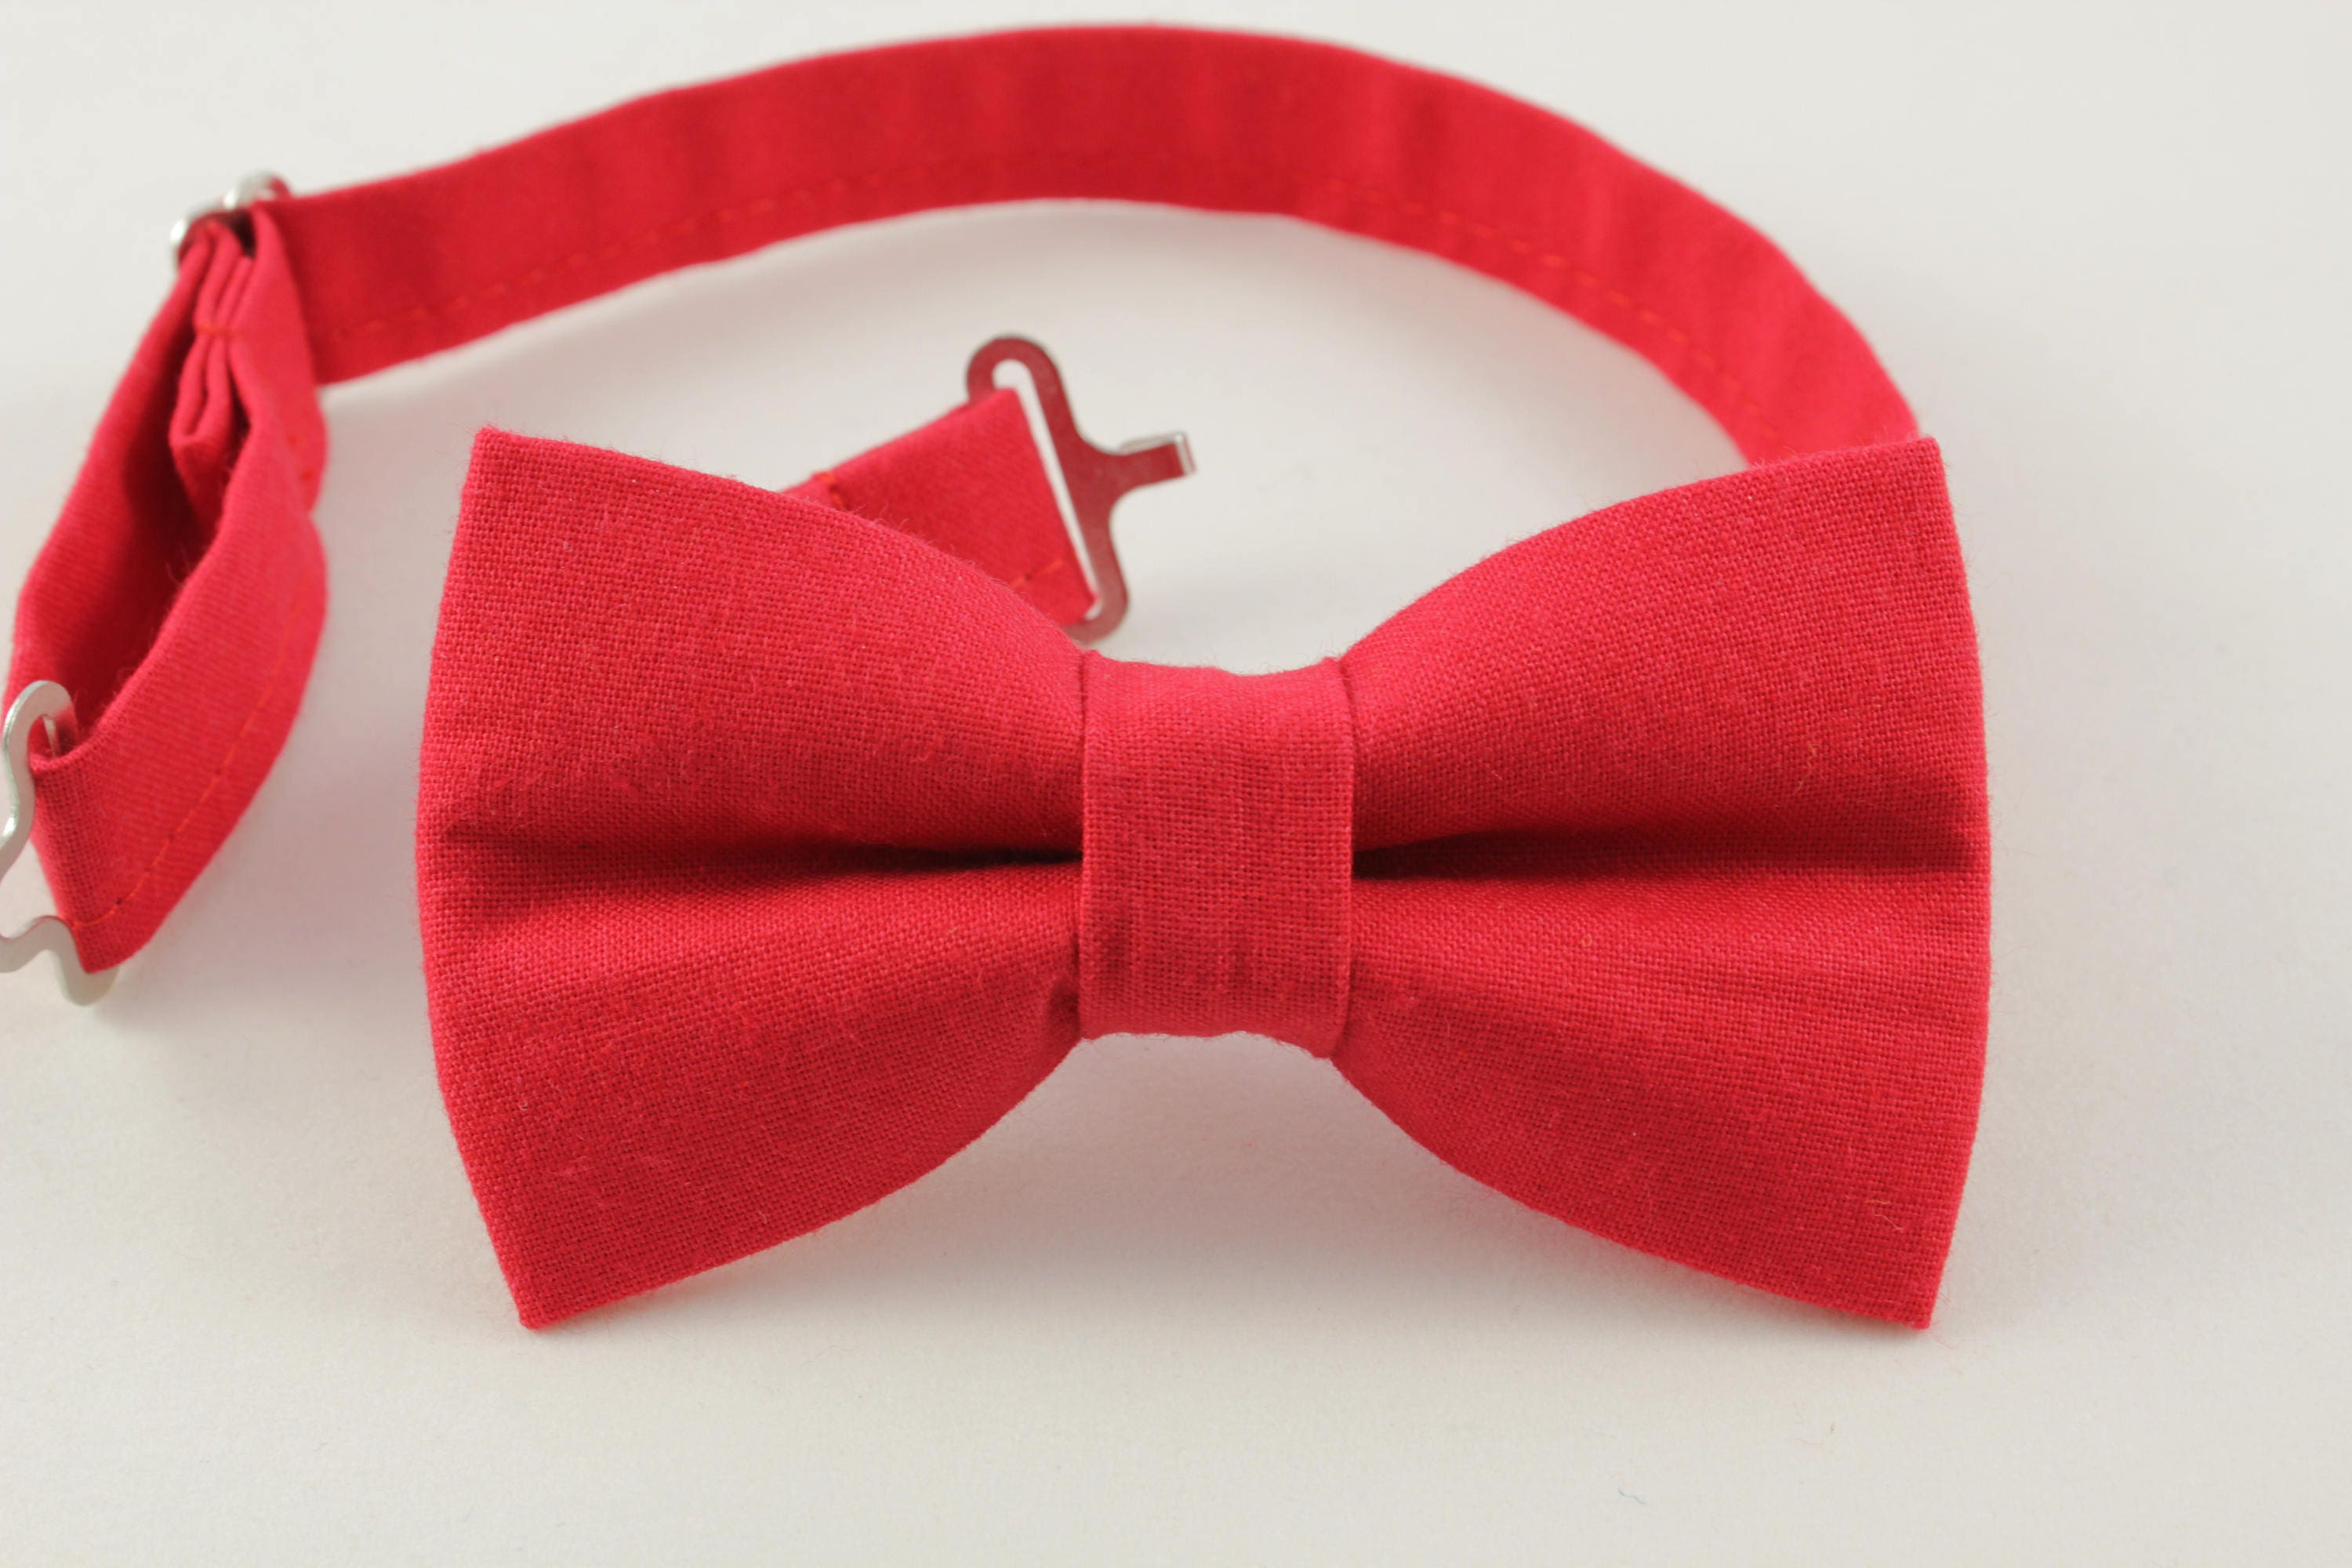 Red Boy Bow tie scarlet red bow tie for boys bright red | Etsy